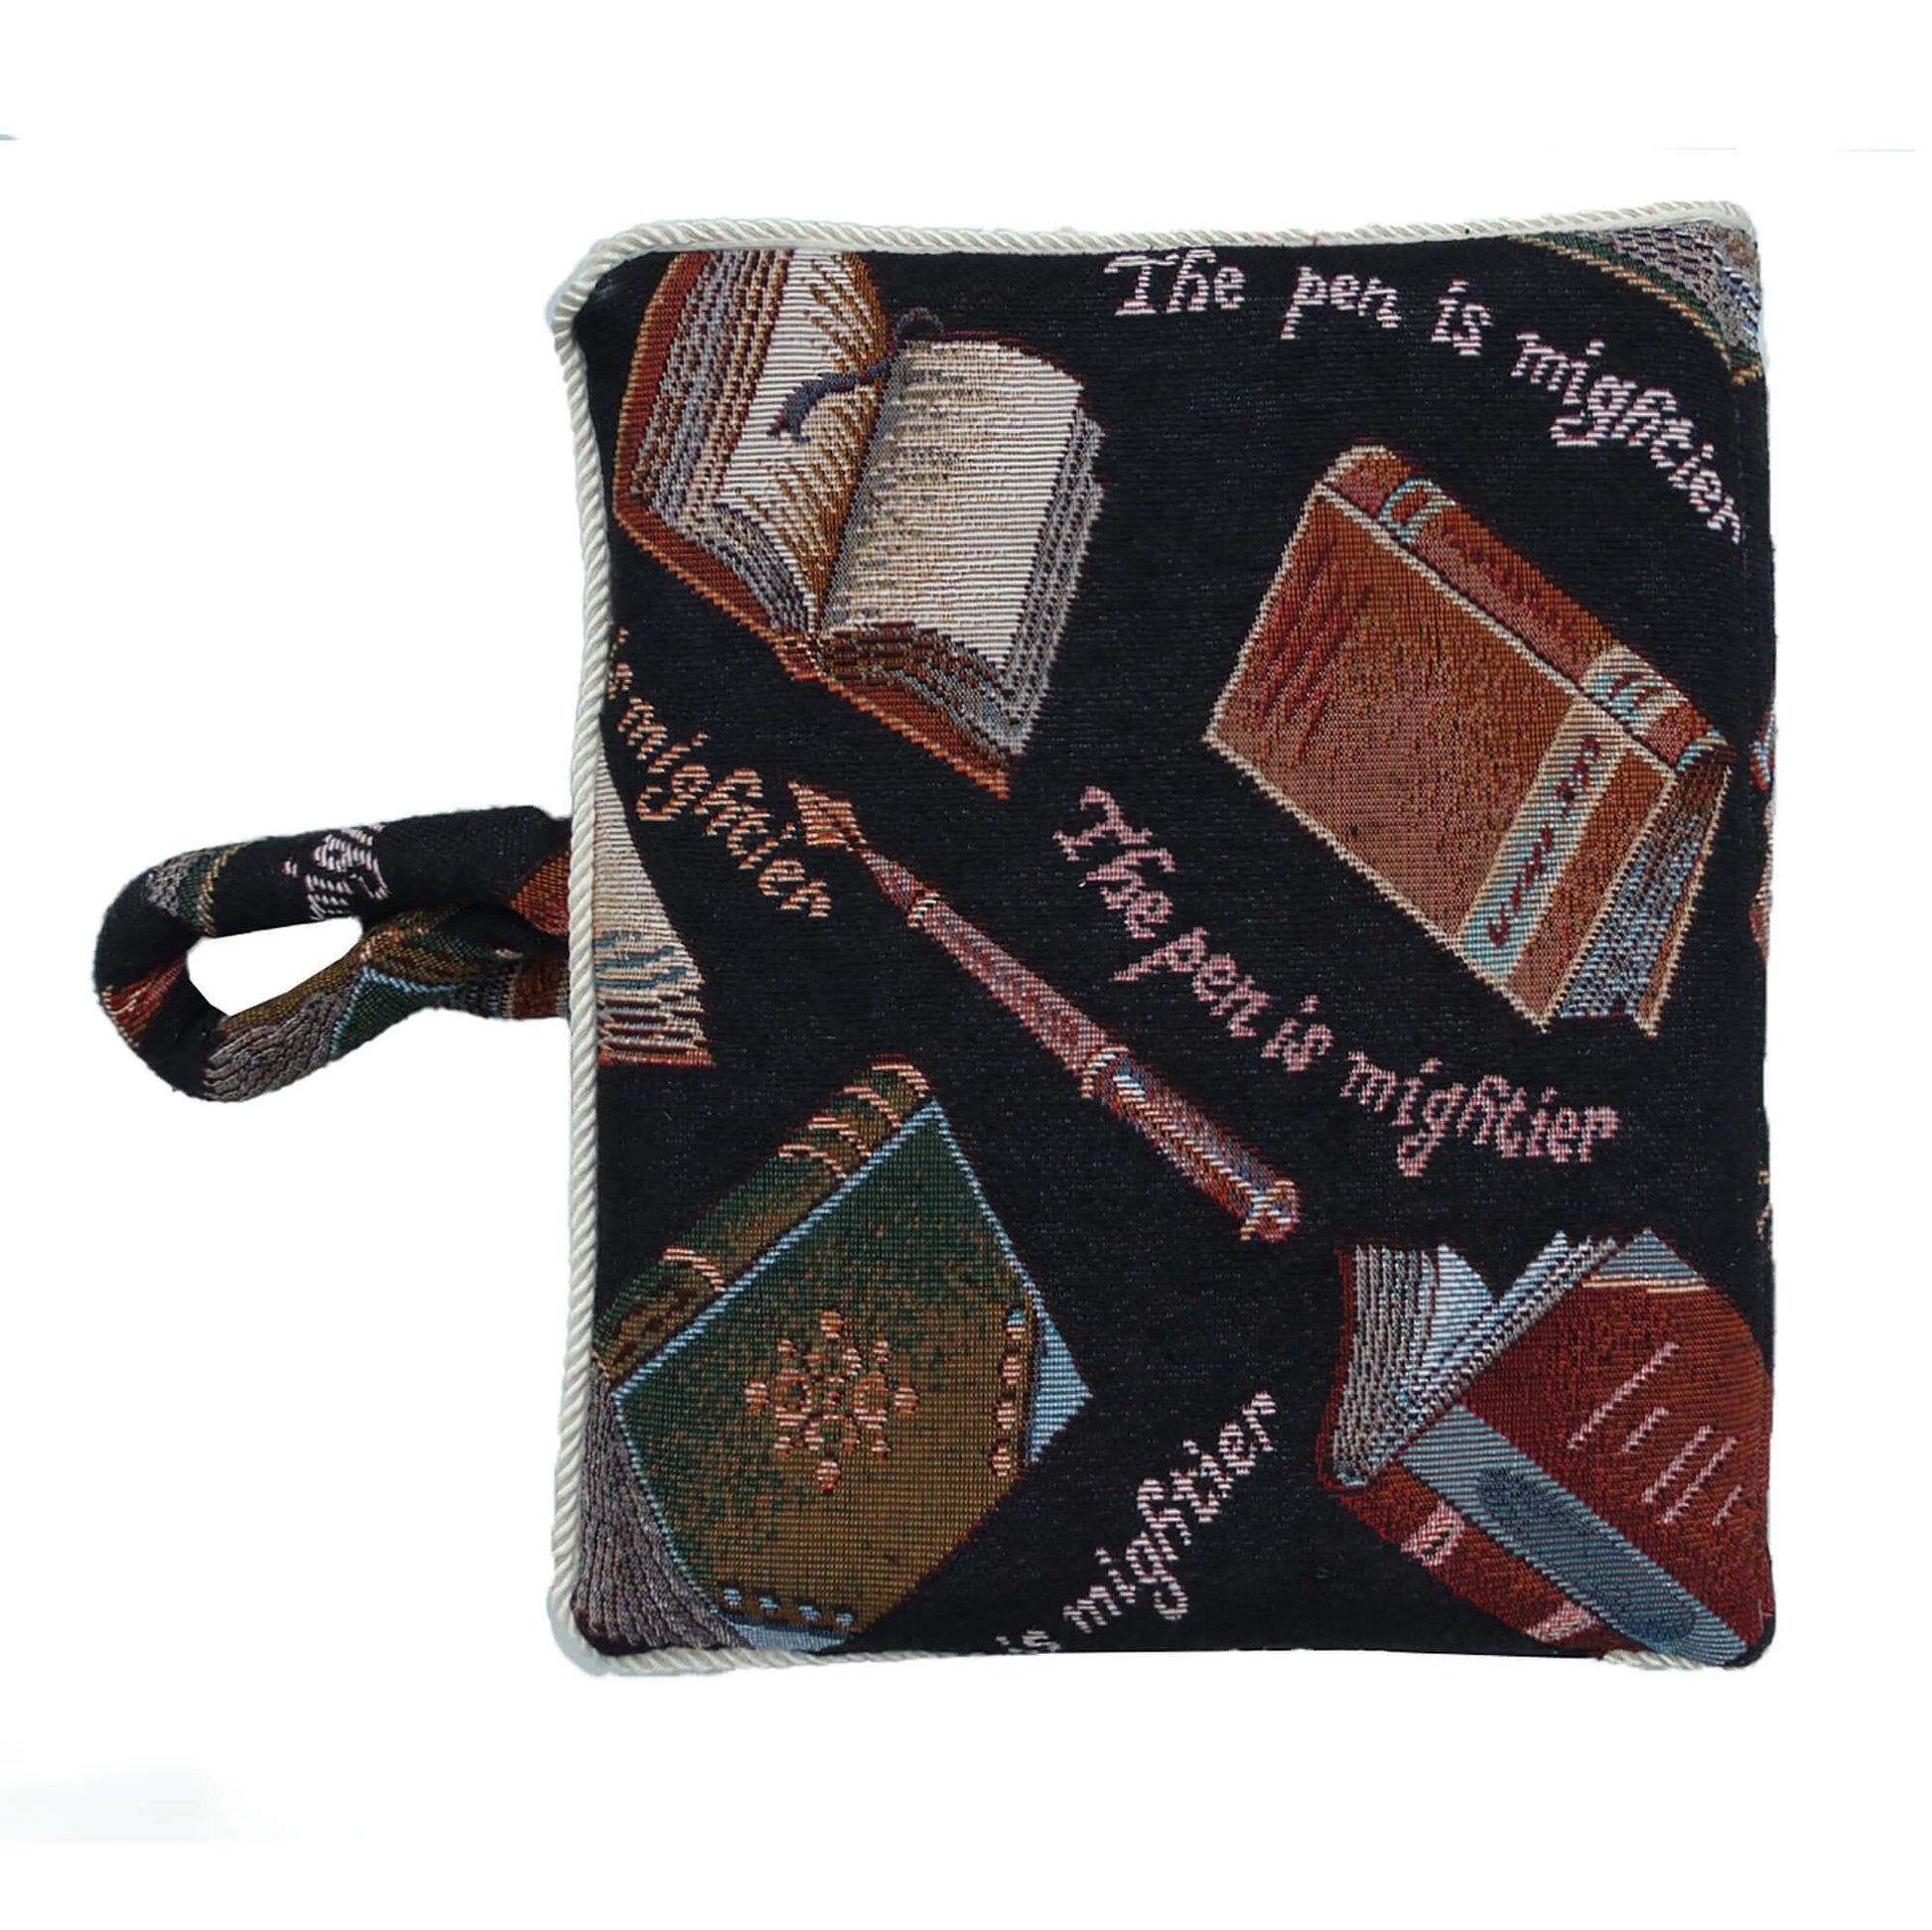 Thick-padded-fabric-cover,-sleeve-for-books,-tablet,-iPad.-Shop-eBargainsAndDeals.com.